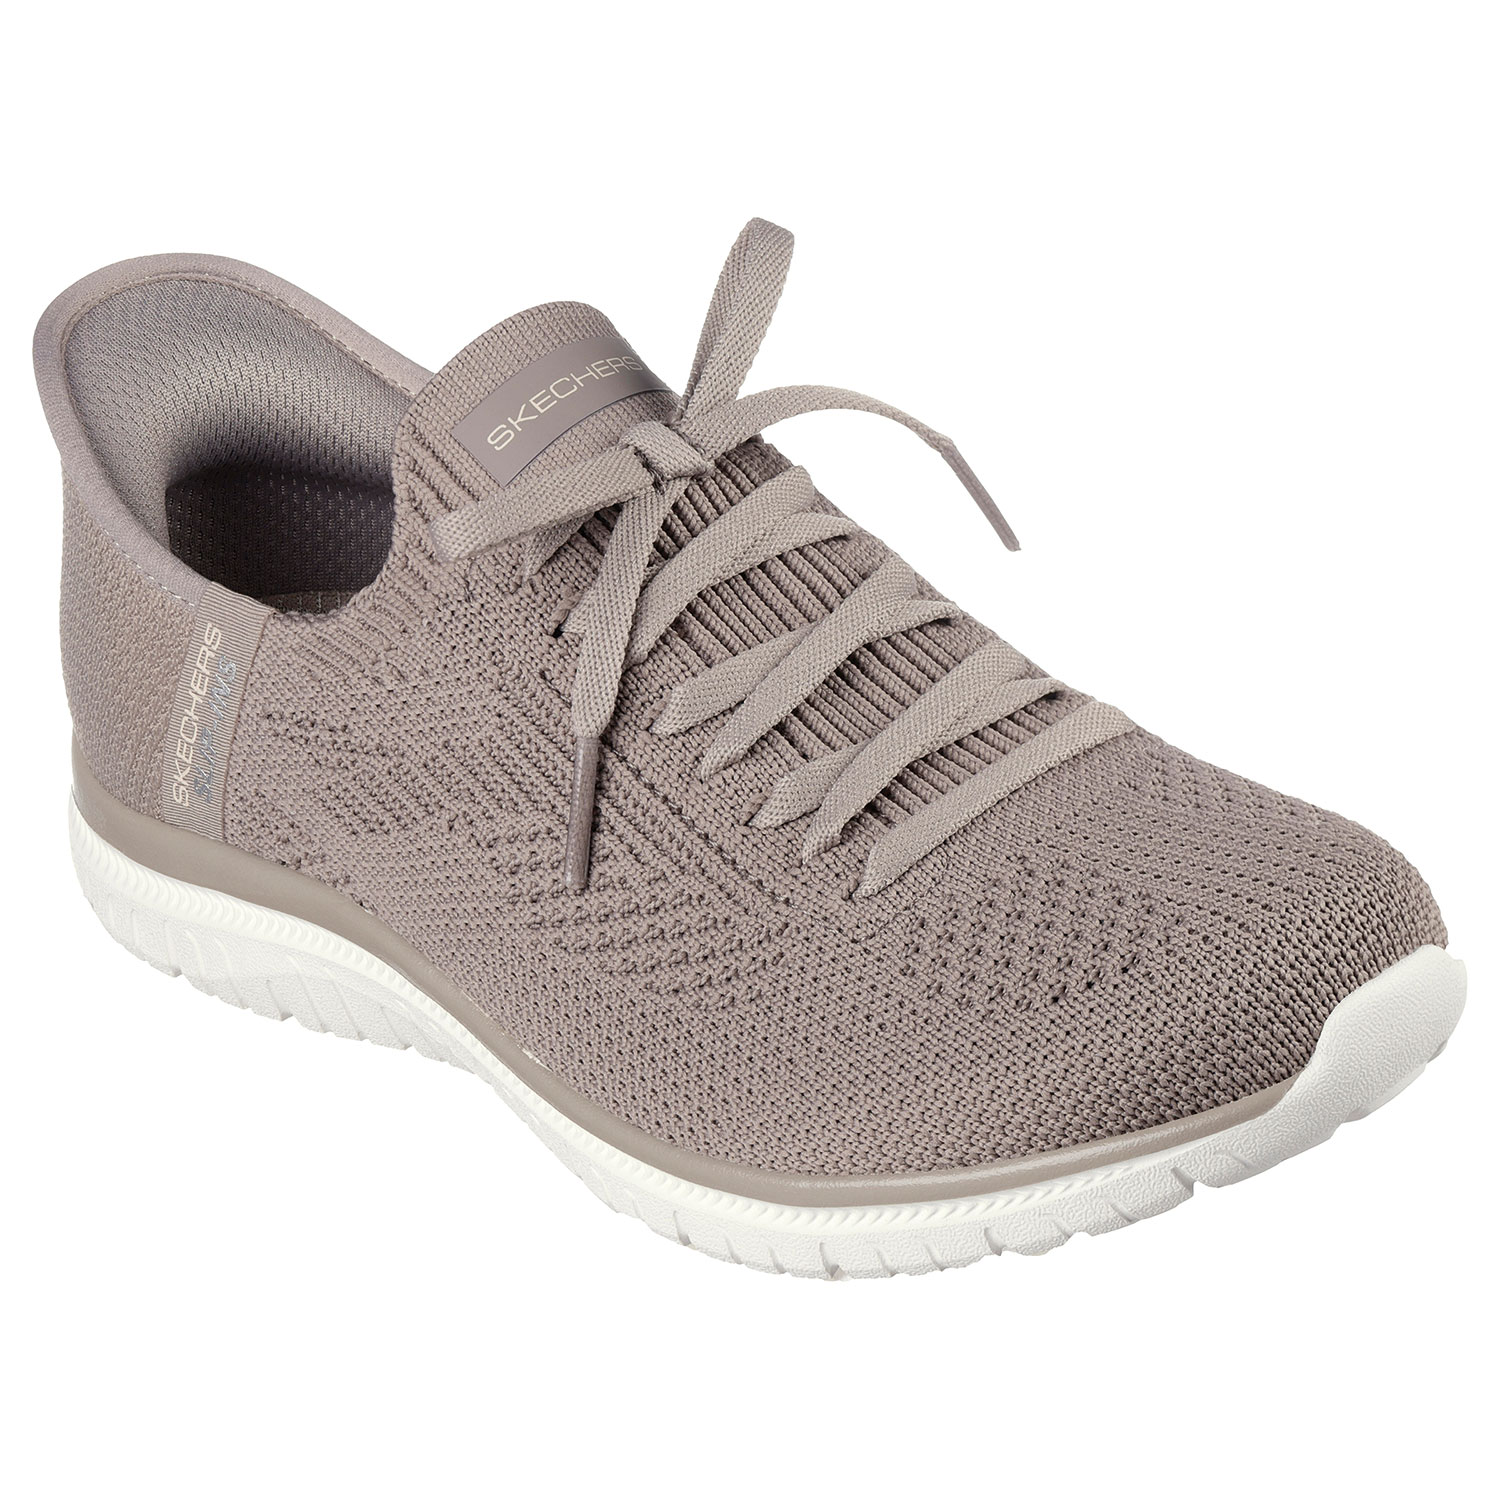 Product image for Skecher Women's Hands Free Slip-ins Virtue Sneakers